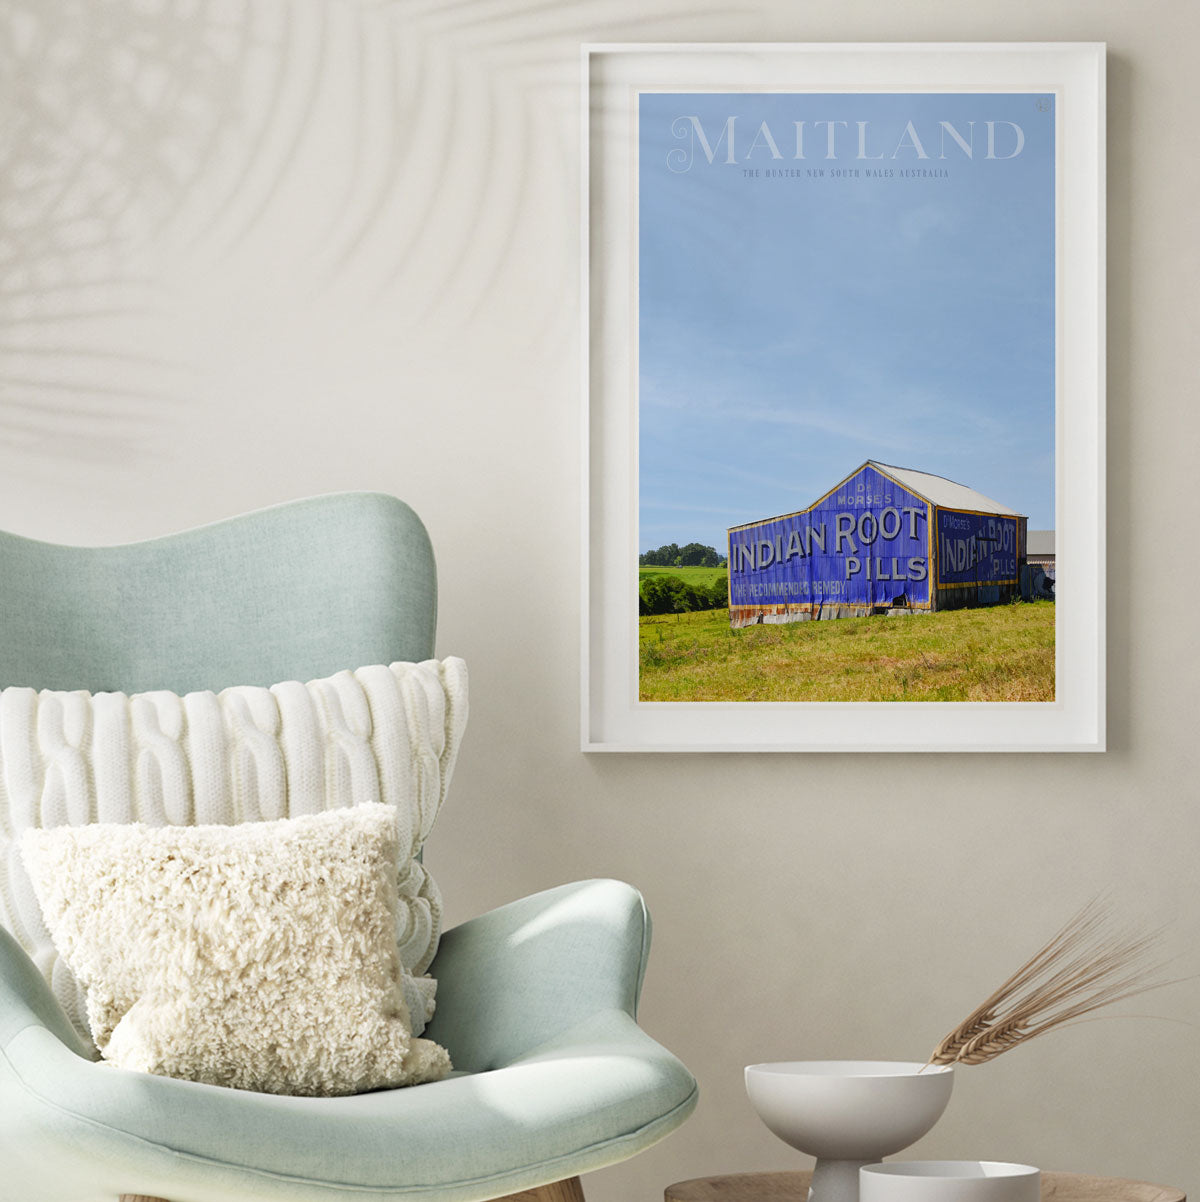 Maitland retro vintage travel poster print from Places We Luv